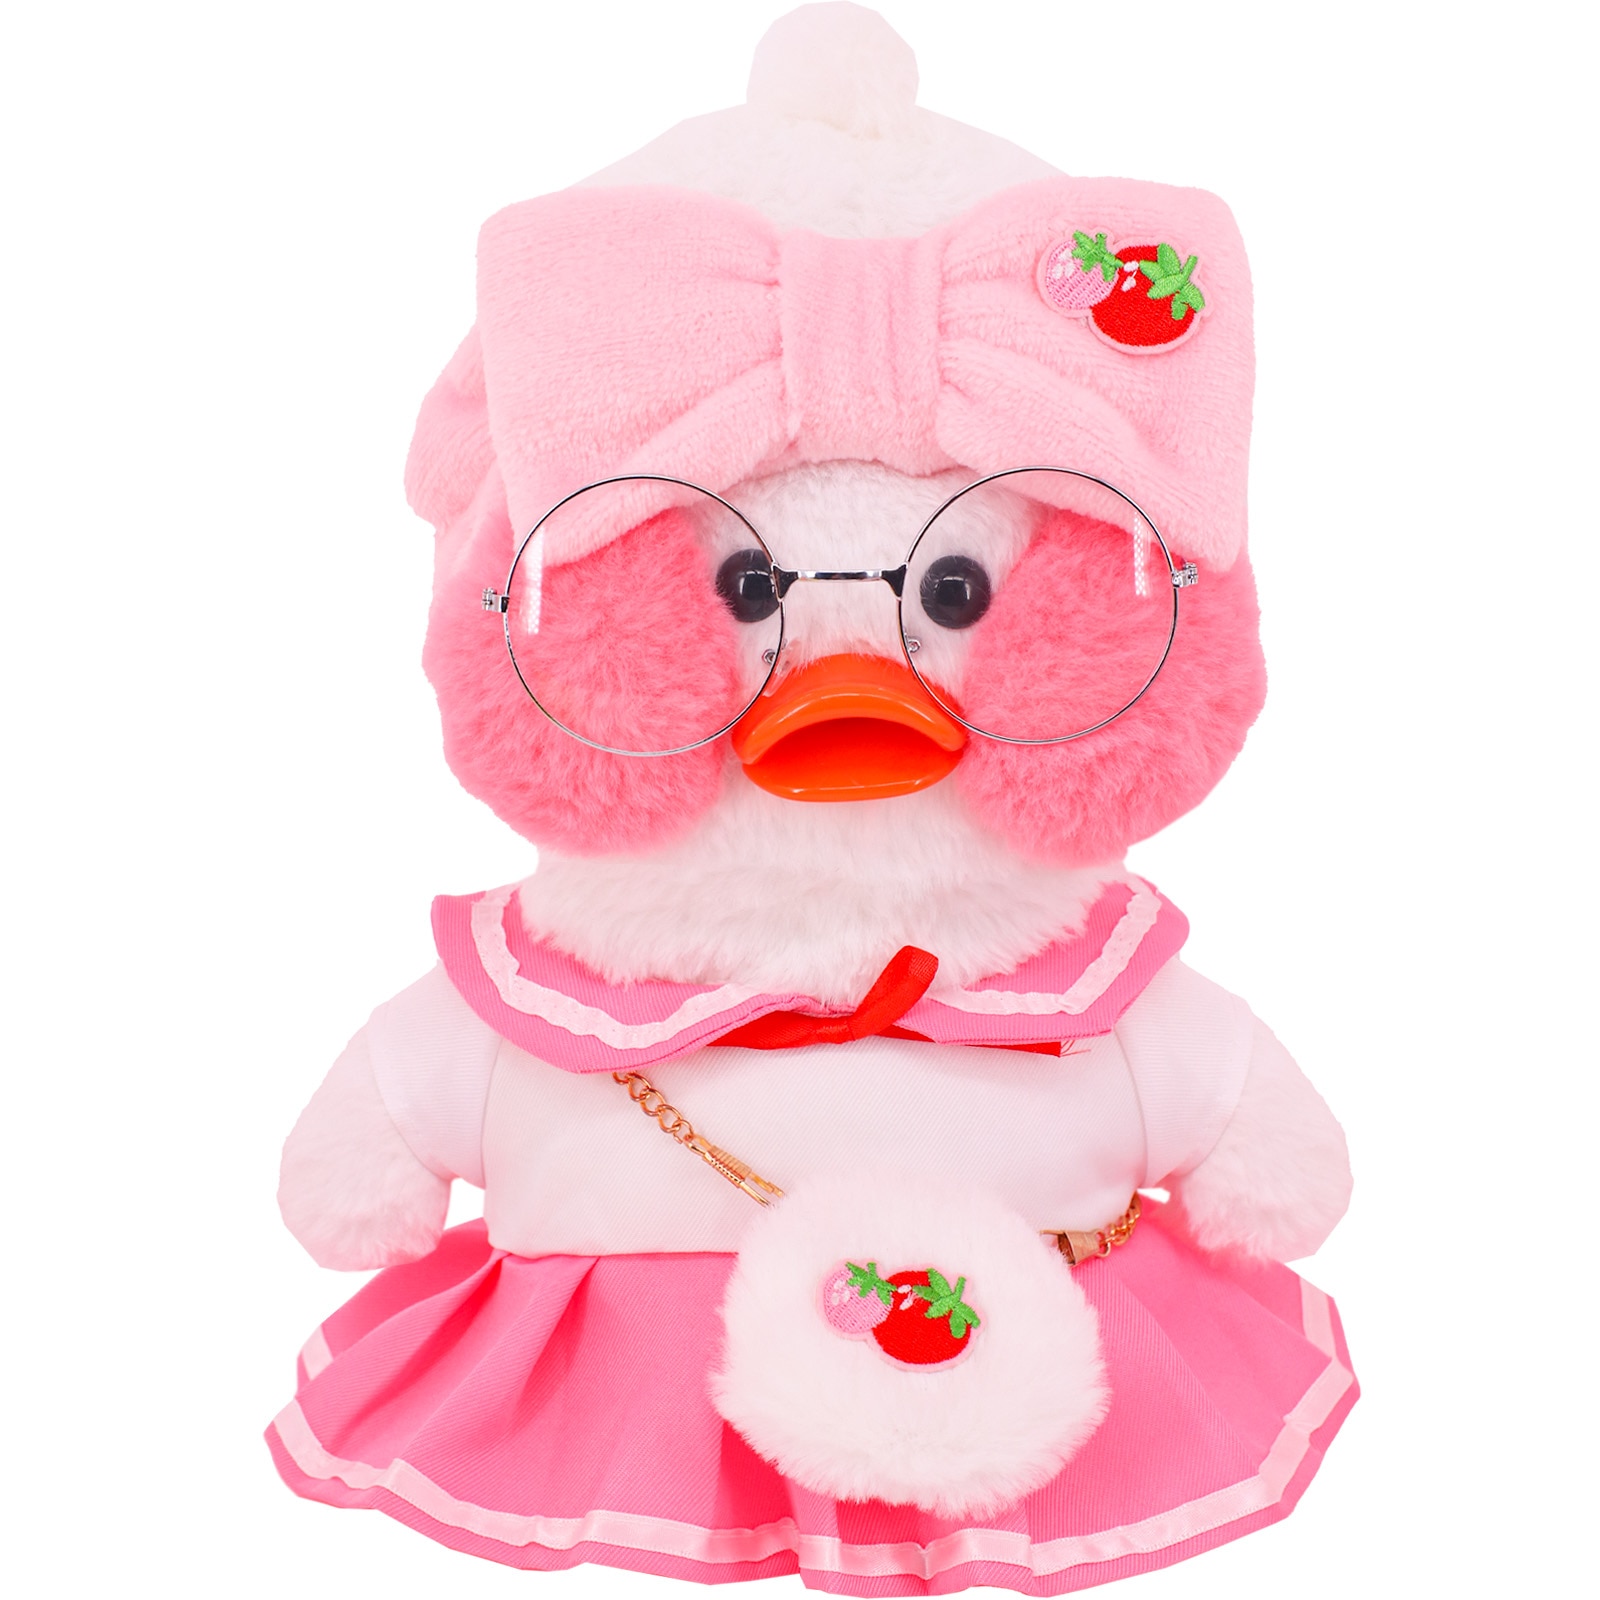 30 LalaFanfan Duck Pink Series Clothes Accessories Stuffed Soft Duck Figure Toy Animal Birthday Girl Gift 2 - Lalafanfan Shop